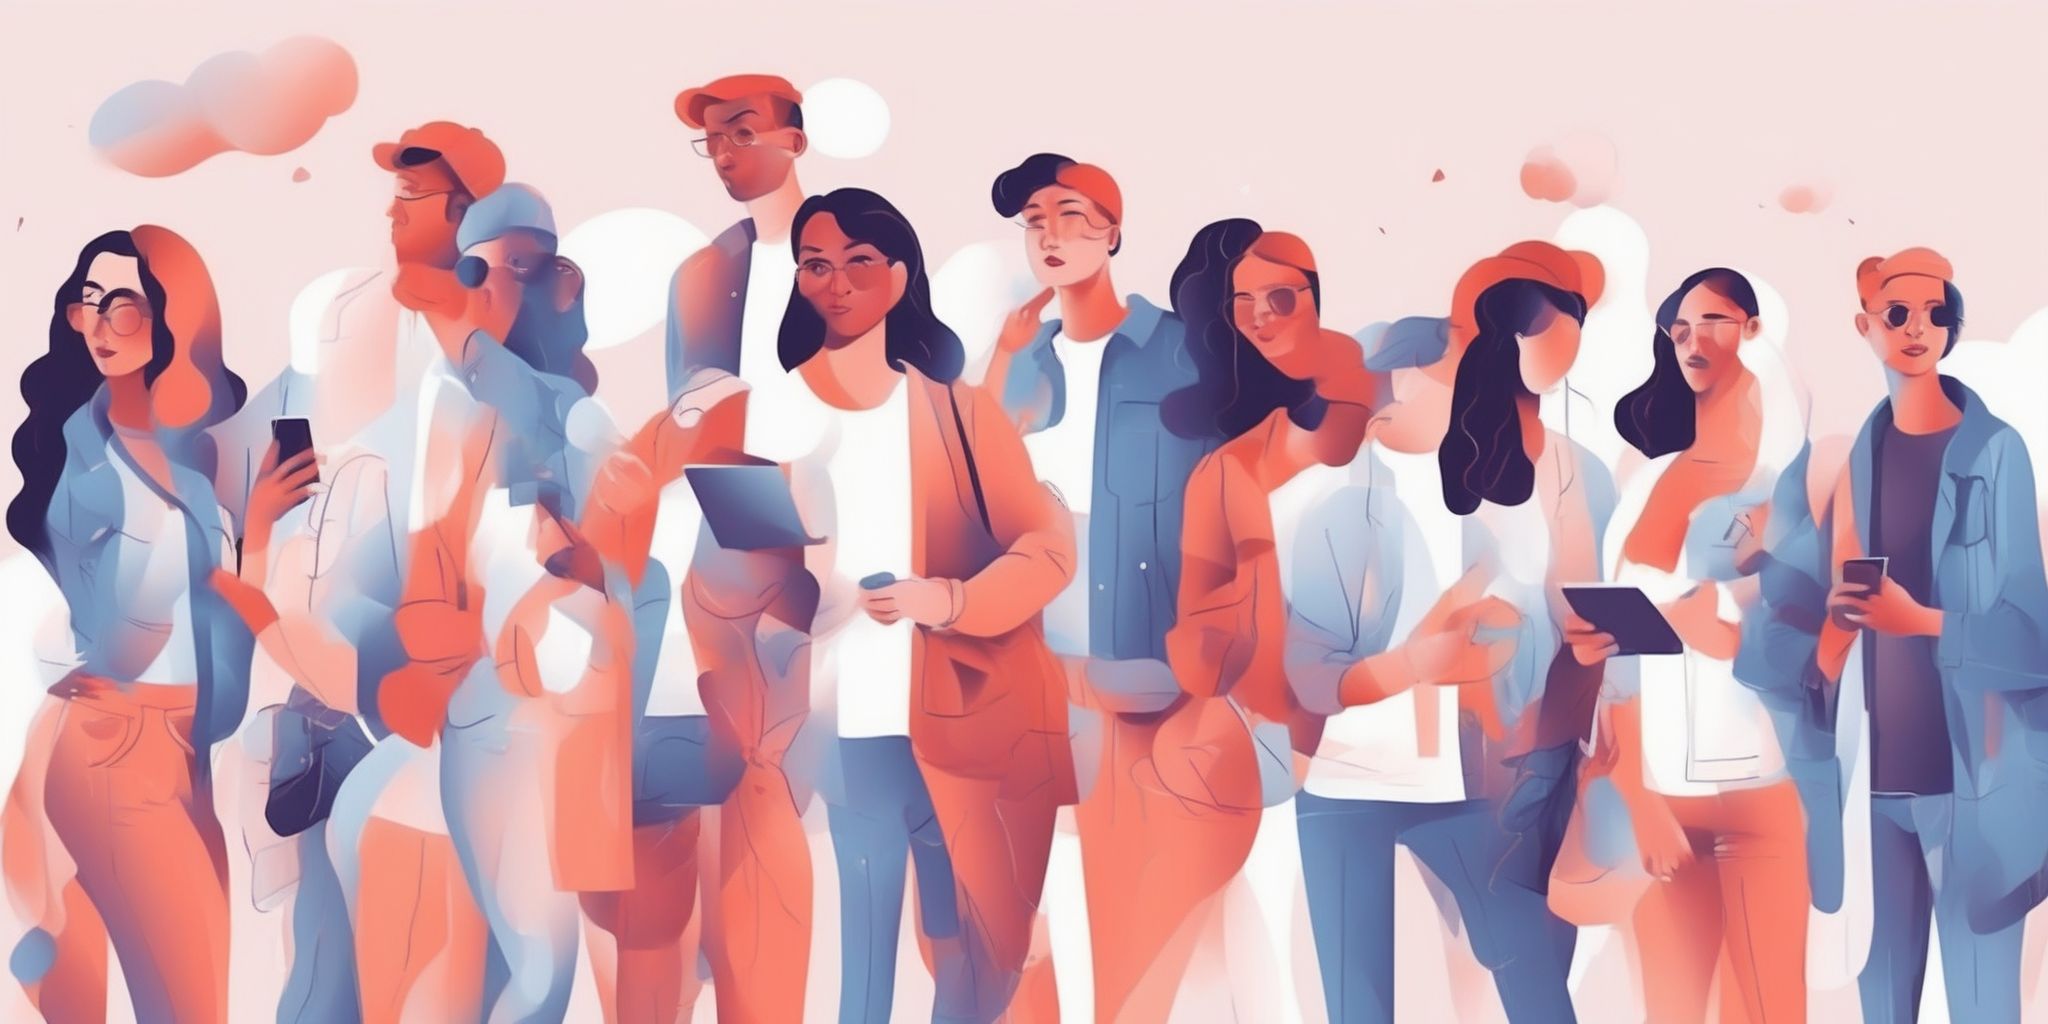 millennials in illustration style with gradients and white background